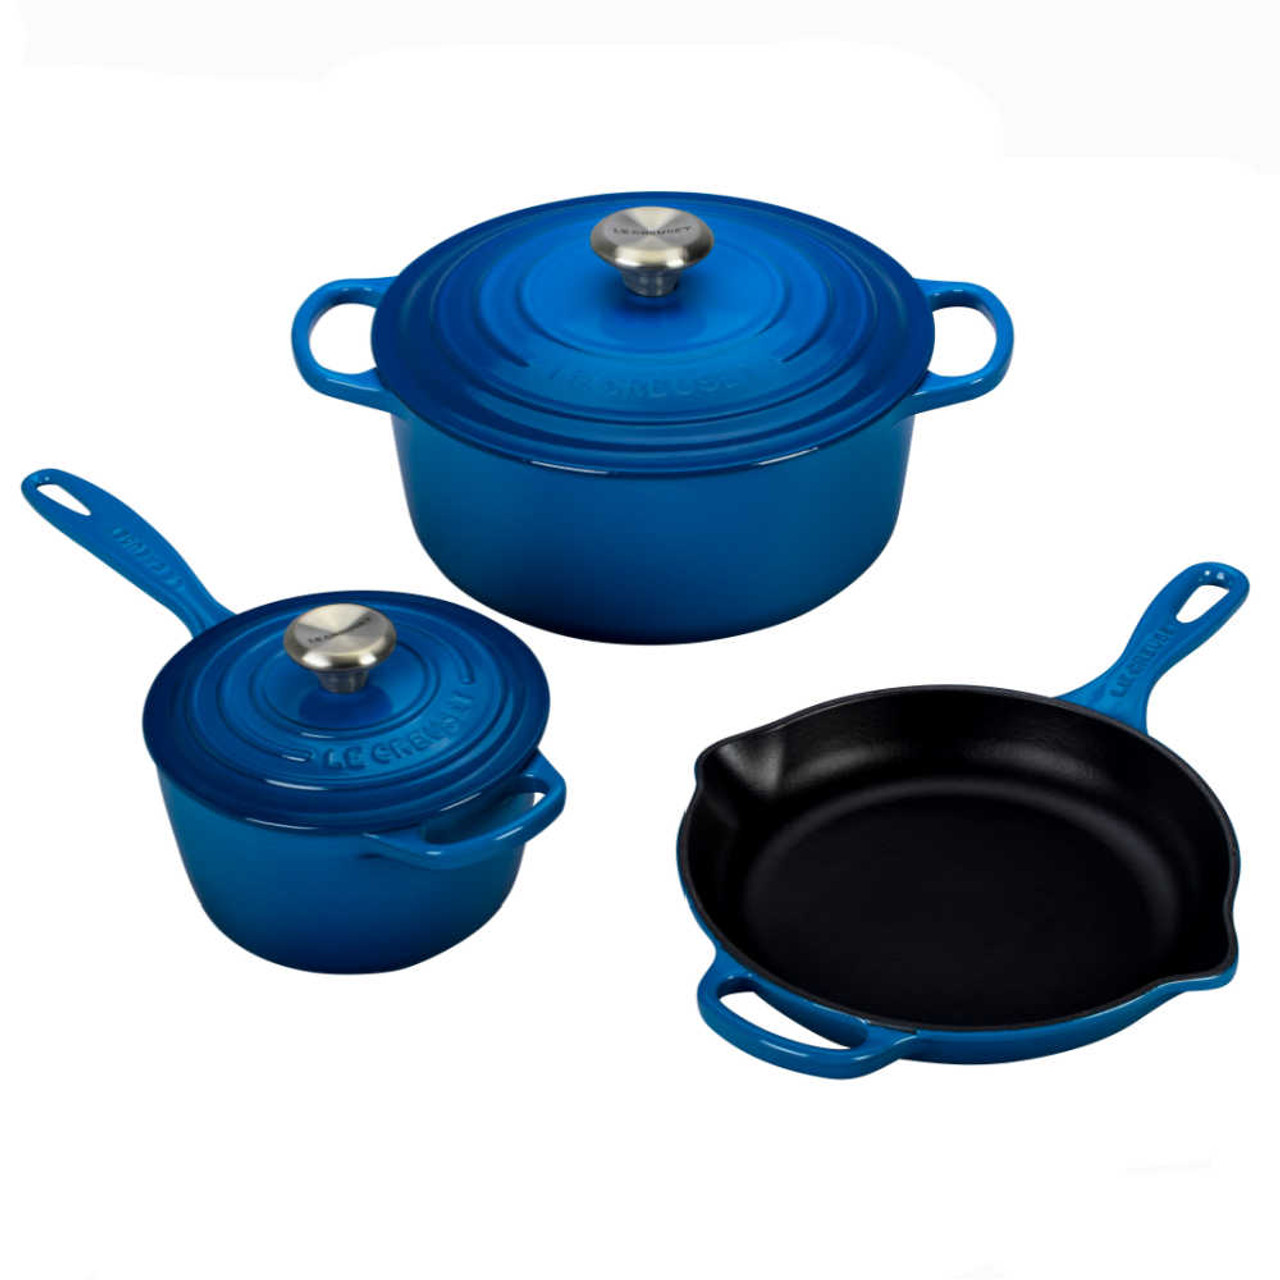 https://cdn11.bigcommerce.com/s-hccytny0od/images/stencil/1280x1280/products/4124/15359/le-creuset-5pc-set-marseille__08428.1625670210.jpg?c=2?imbypass=on